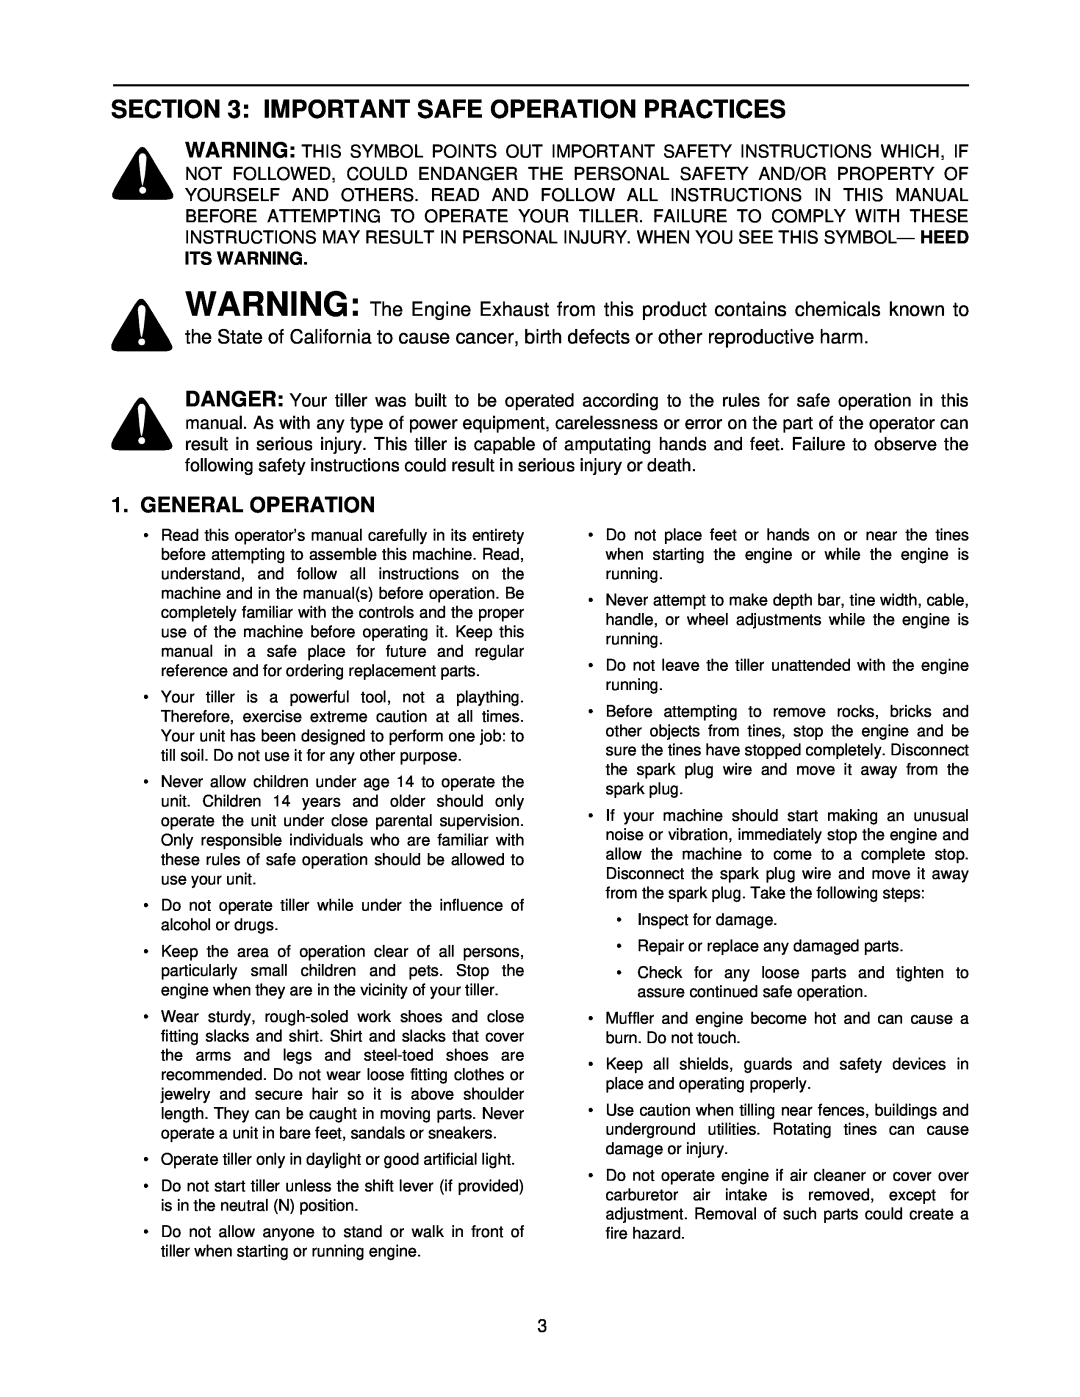 White 414 manual Important Safe Operation Practices, General Operation 